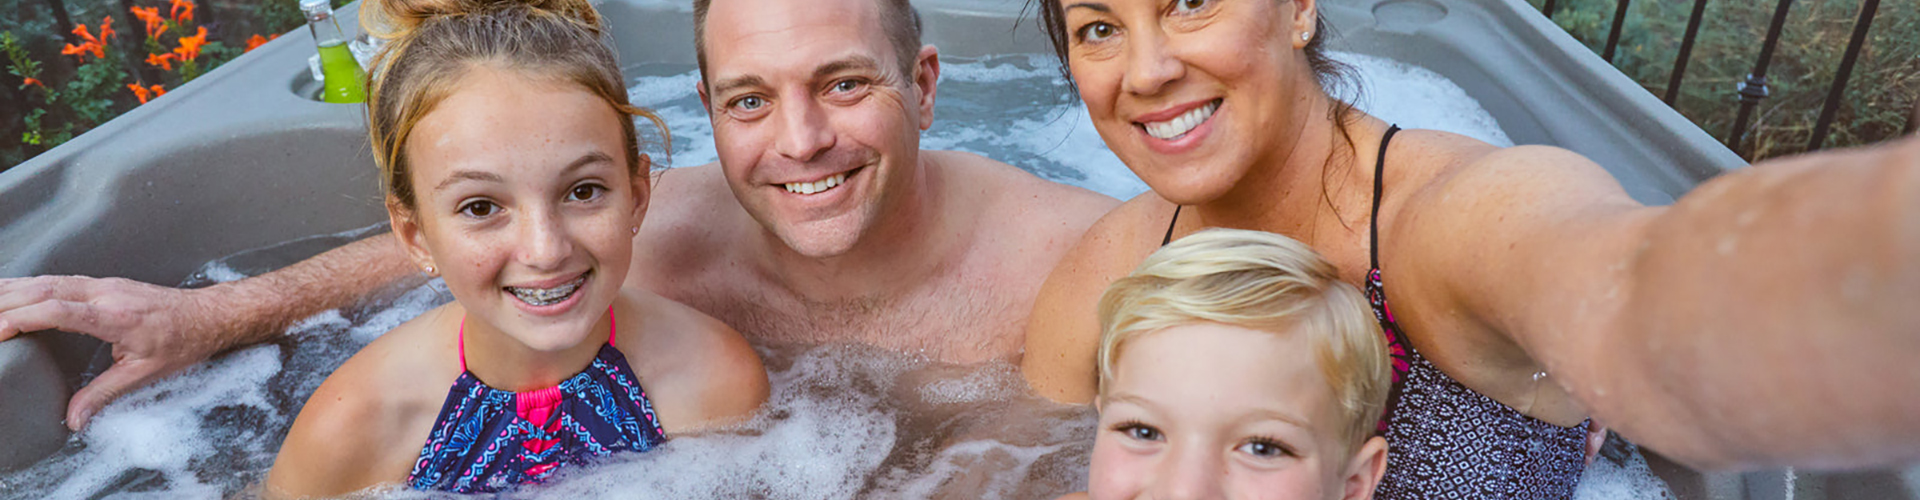 4 Tips For Getting The Most Out Of Your Hot Tubs Plus Spas